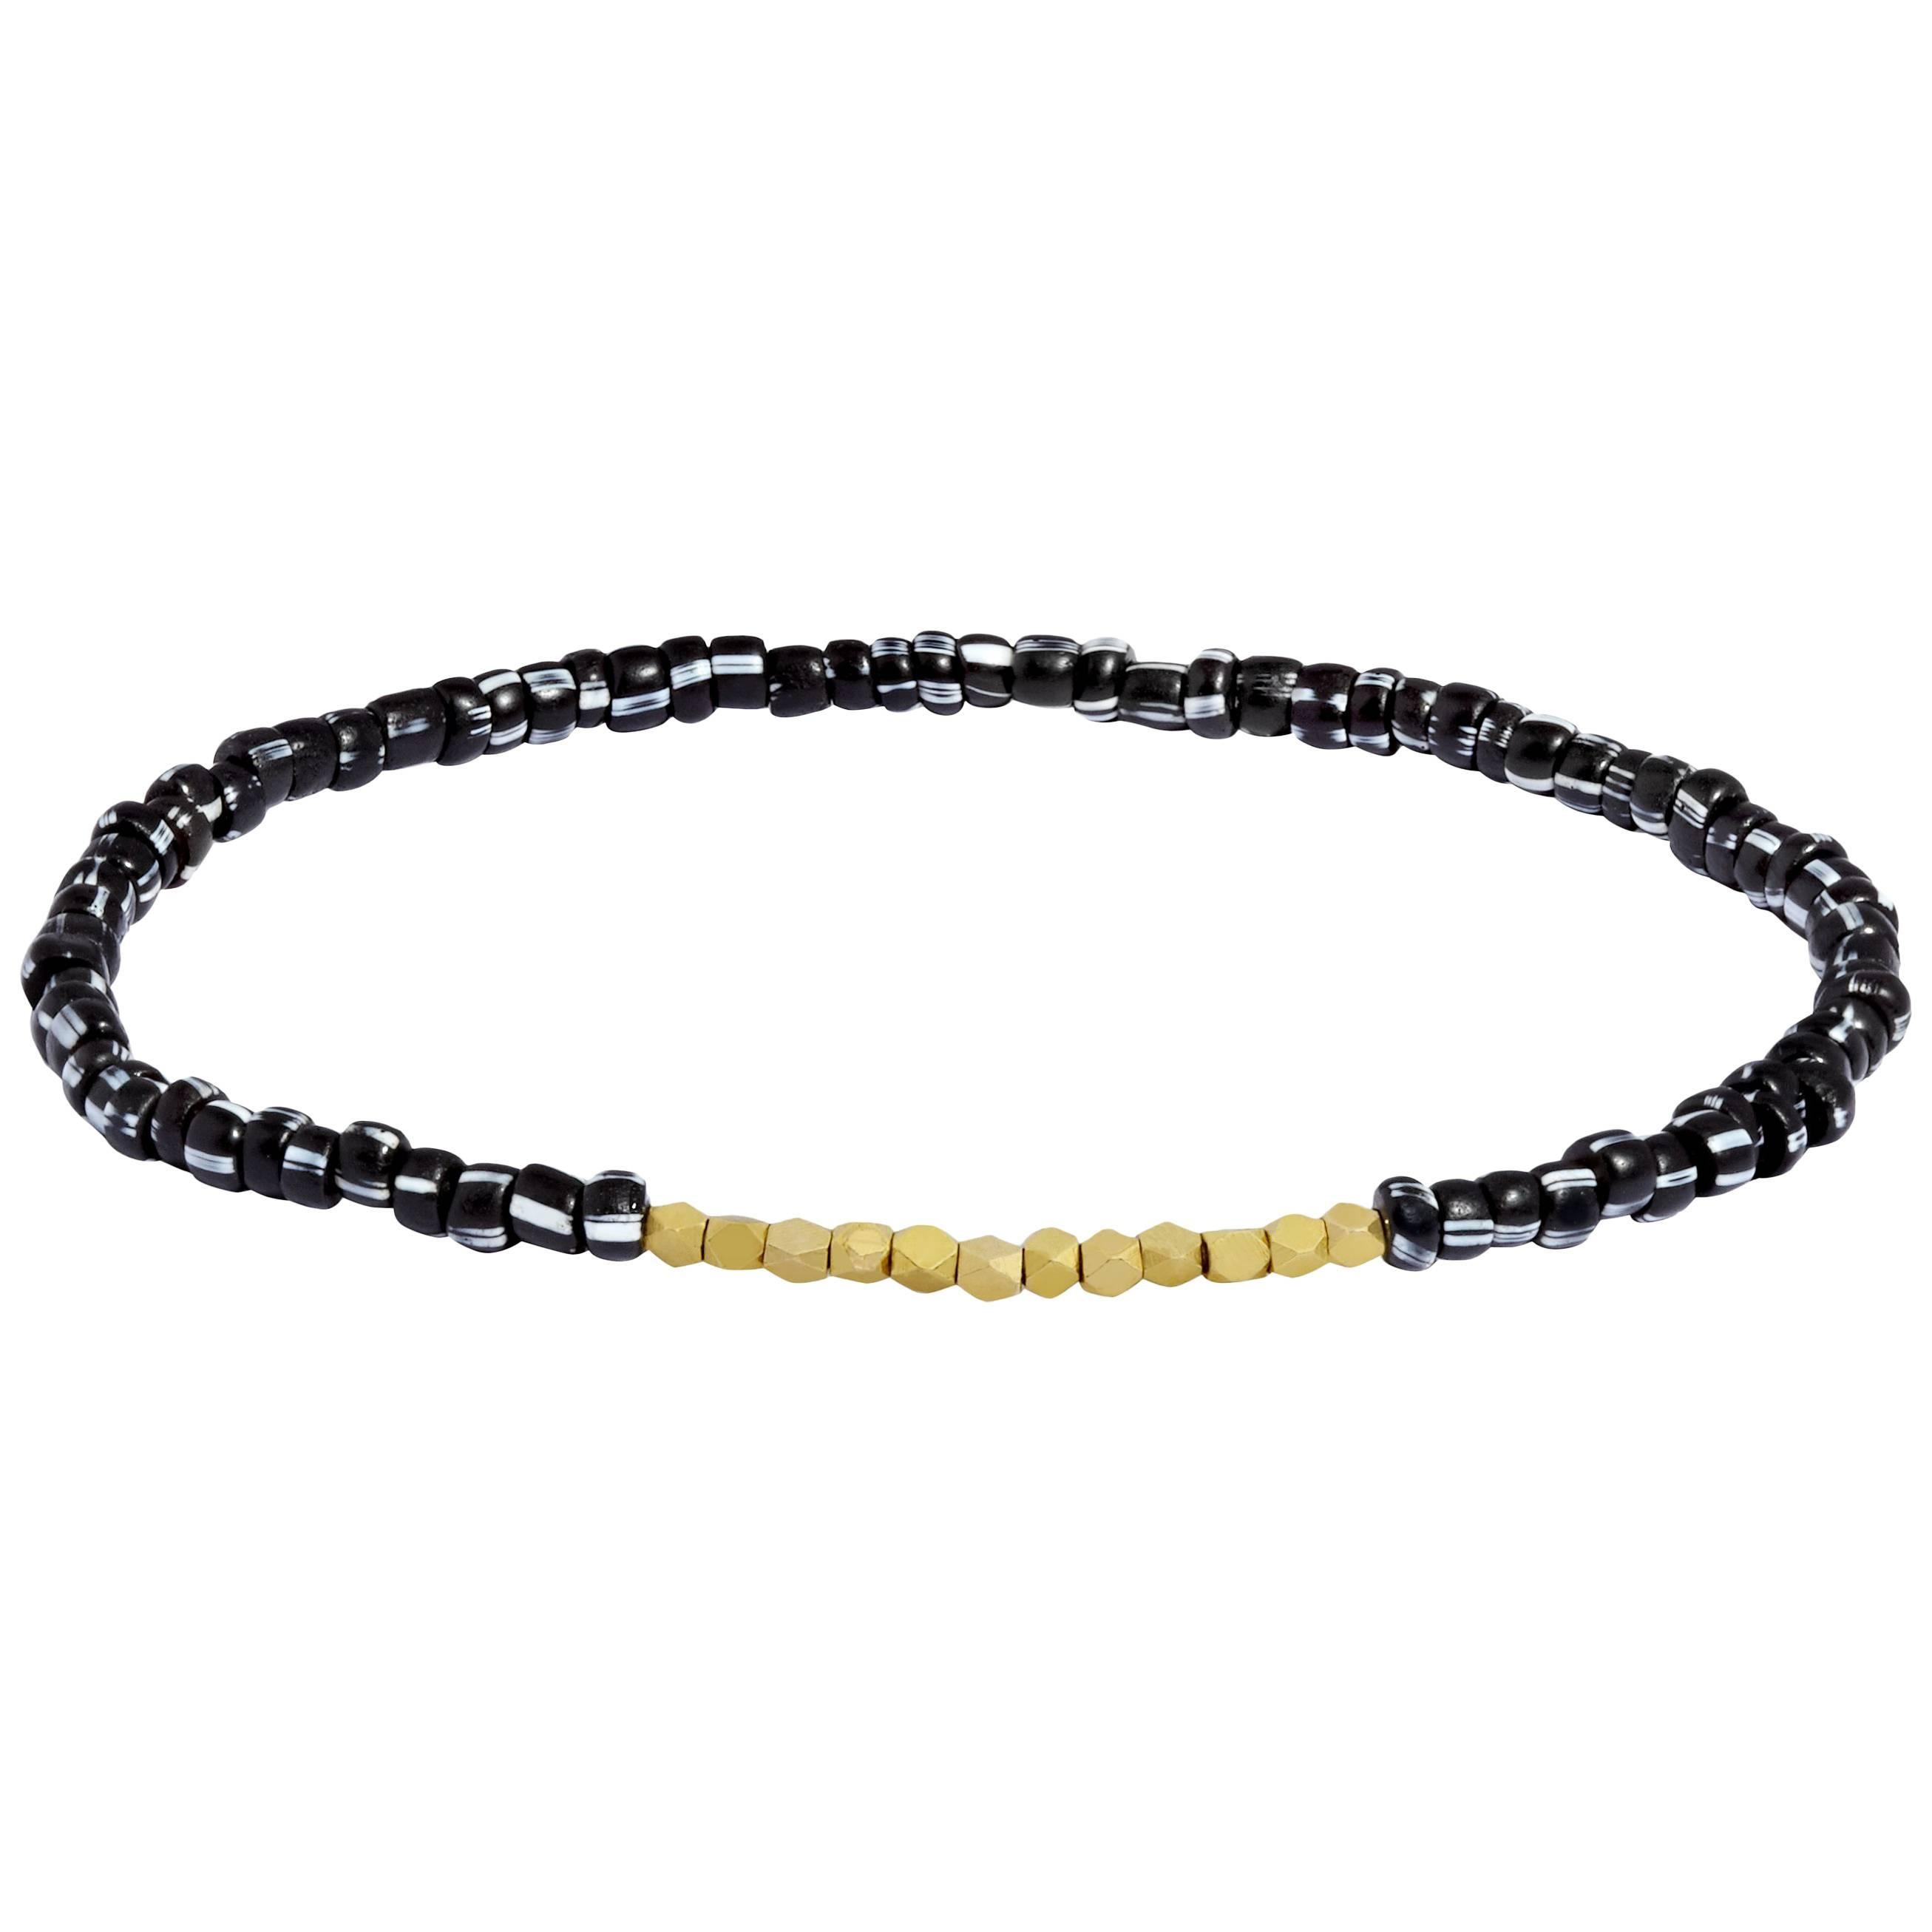 Men's Vintage Black and White Beaded Bracelet with Gold by Allison Bryan